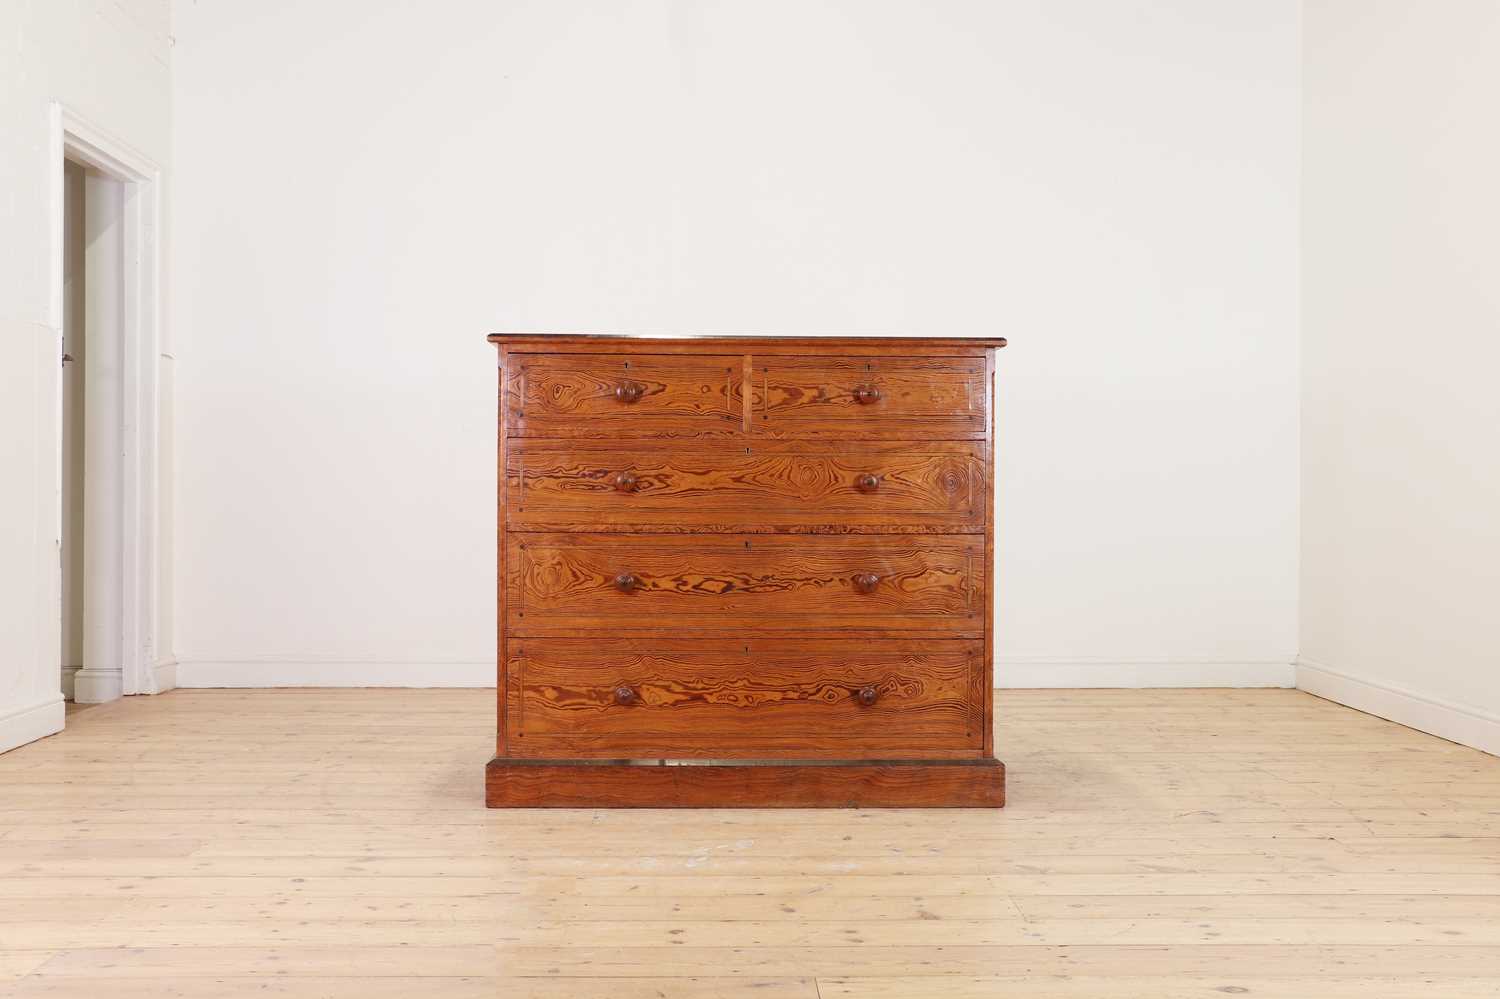 Lot 331 - A Victorian pitch pine chest of drawers